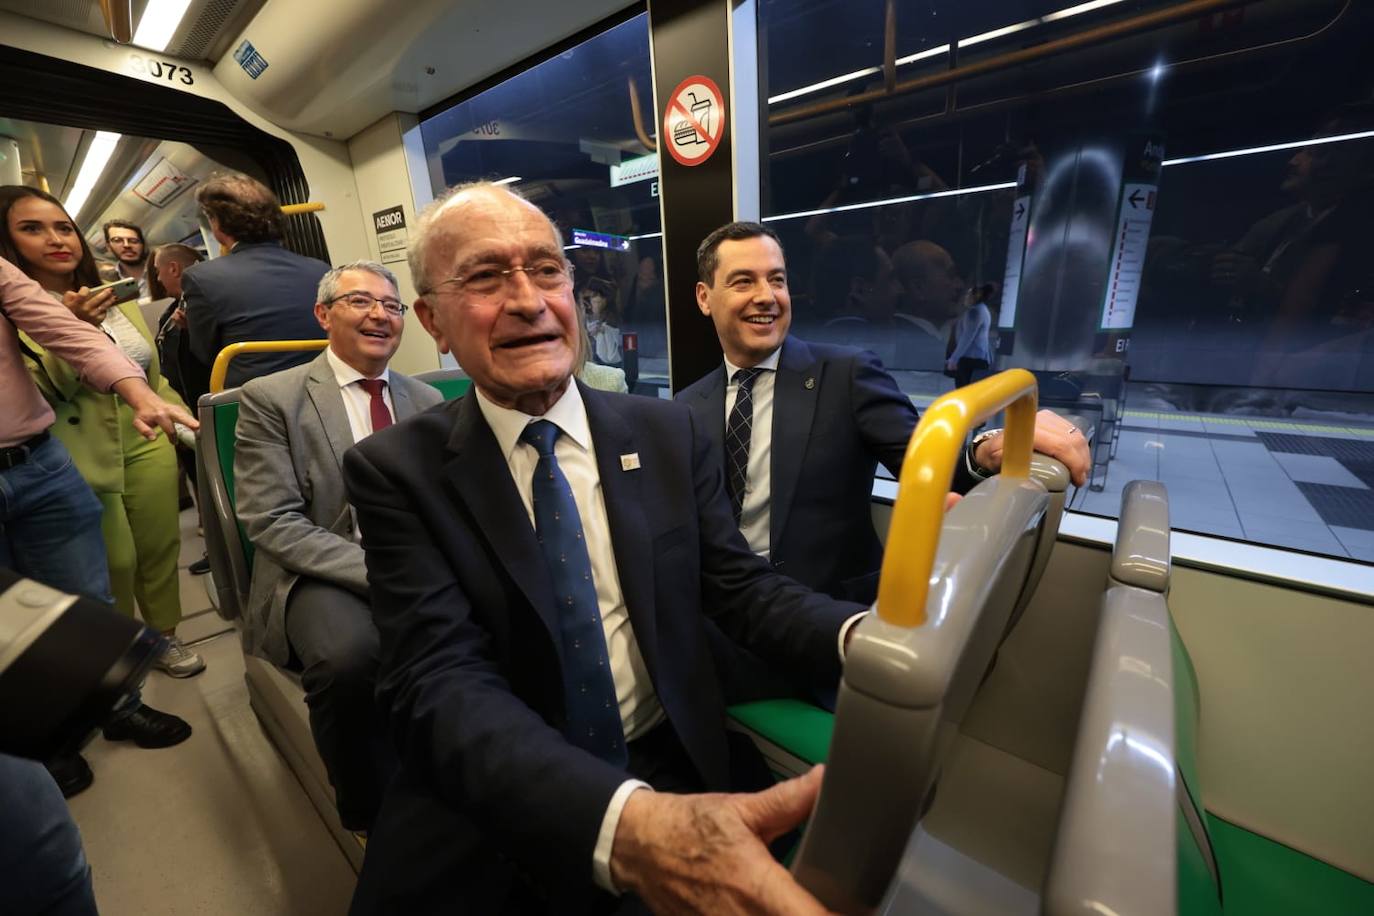 Malaga Metro arrives in city centre, in pictures